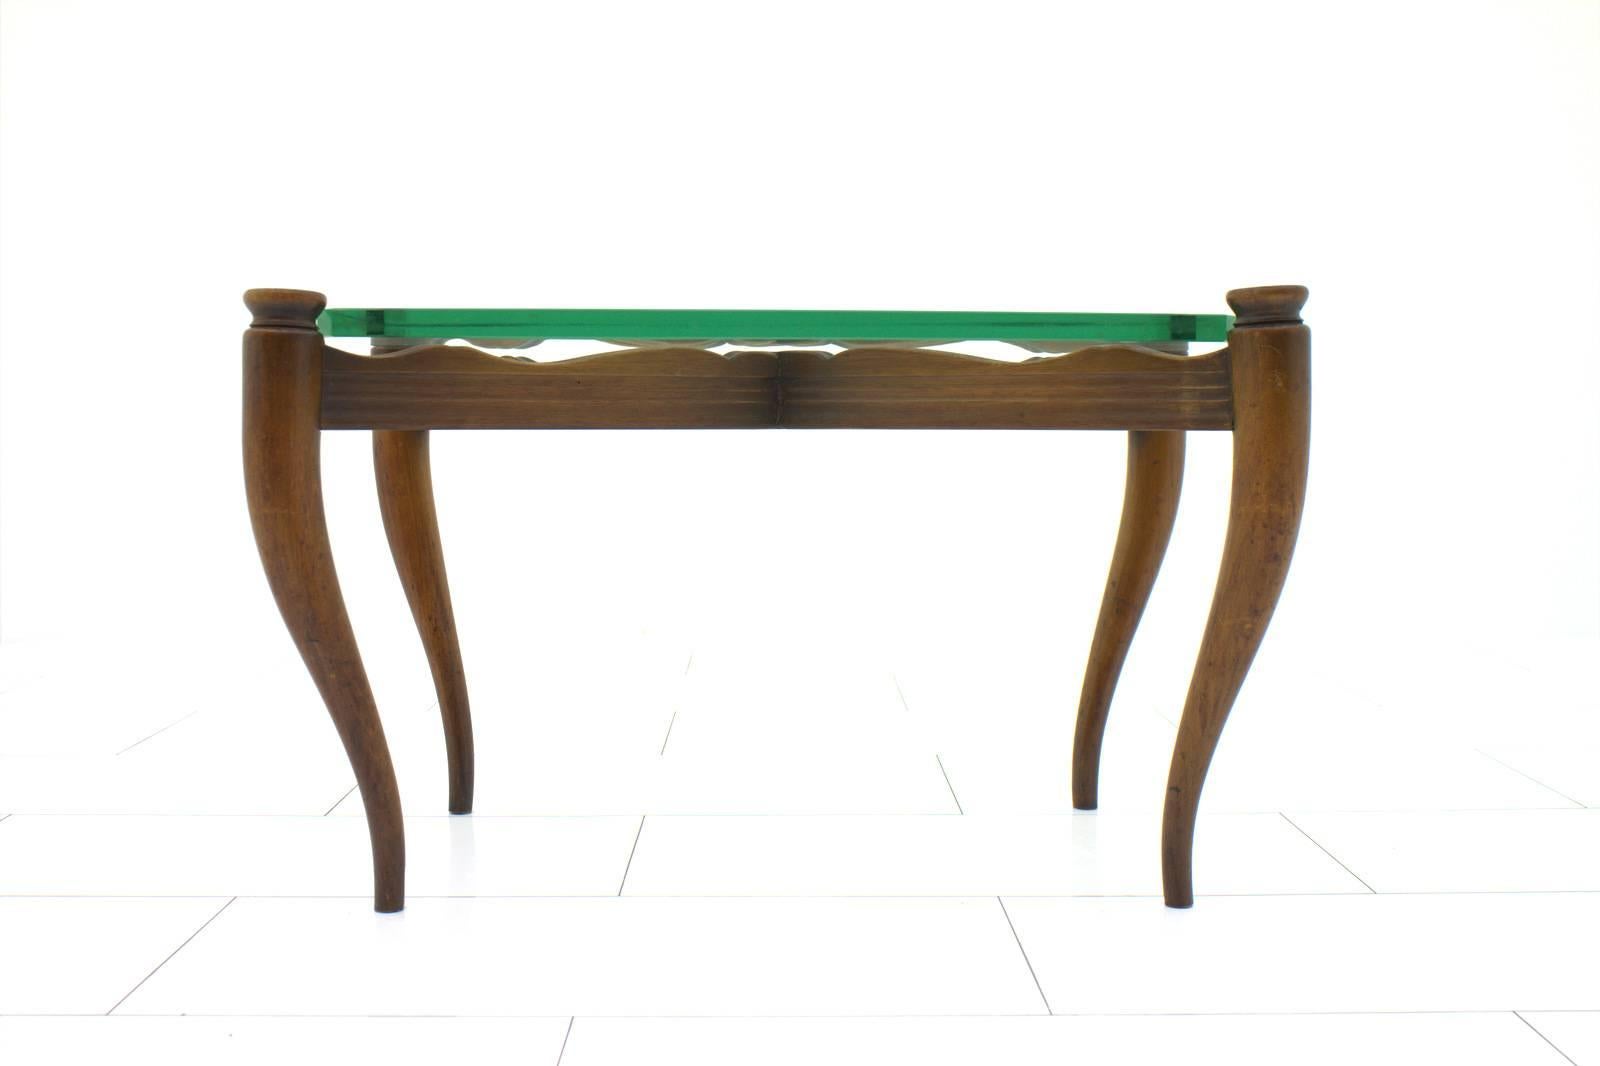 Sofa table wood and glass, Italy 1950s.
Good condition with some small scratches on the glass top.

Worldwide shipping.